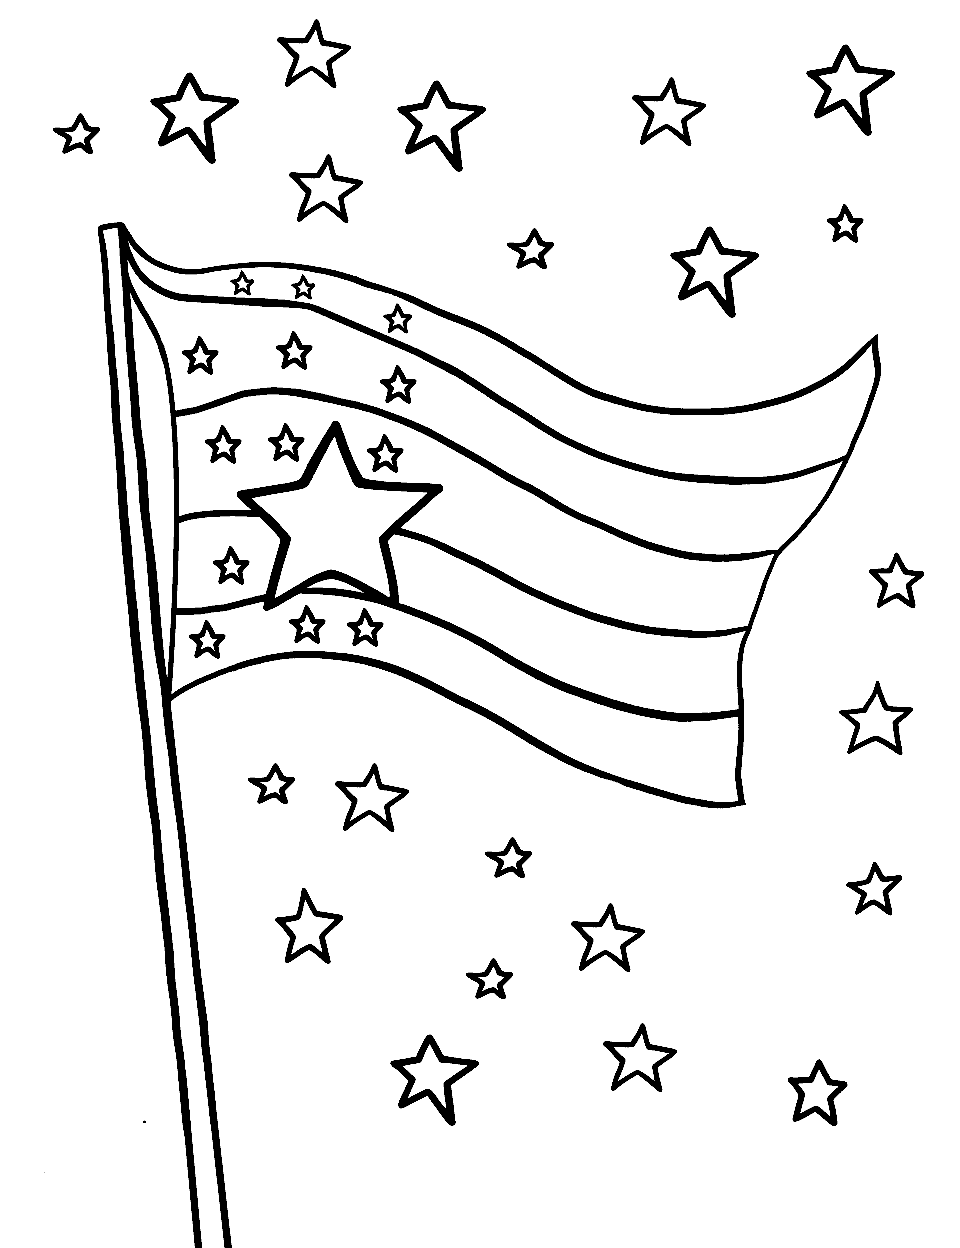 Star and Stripes Flag Coloring Page - A flag design with stars and stripes.